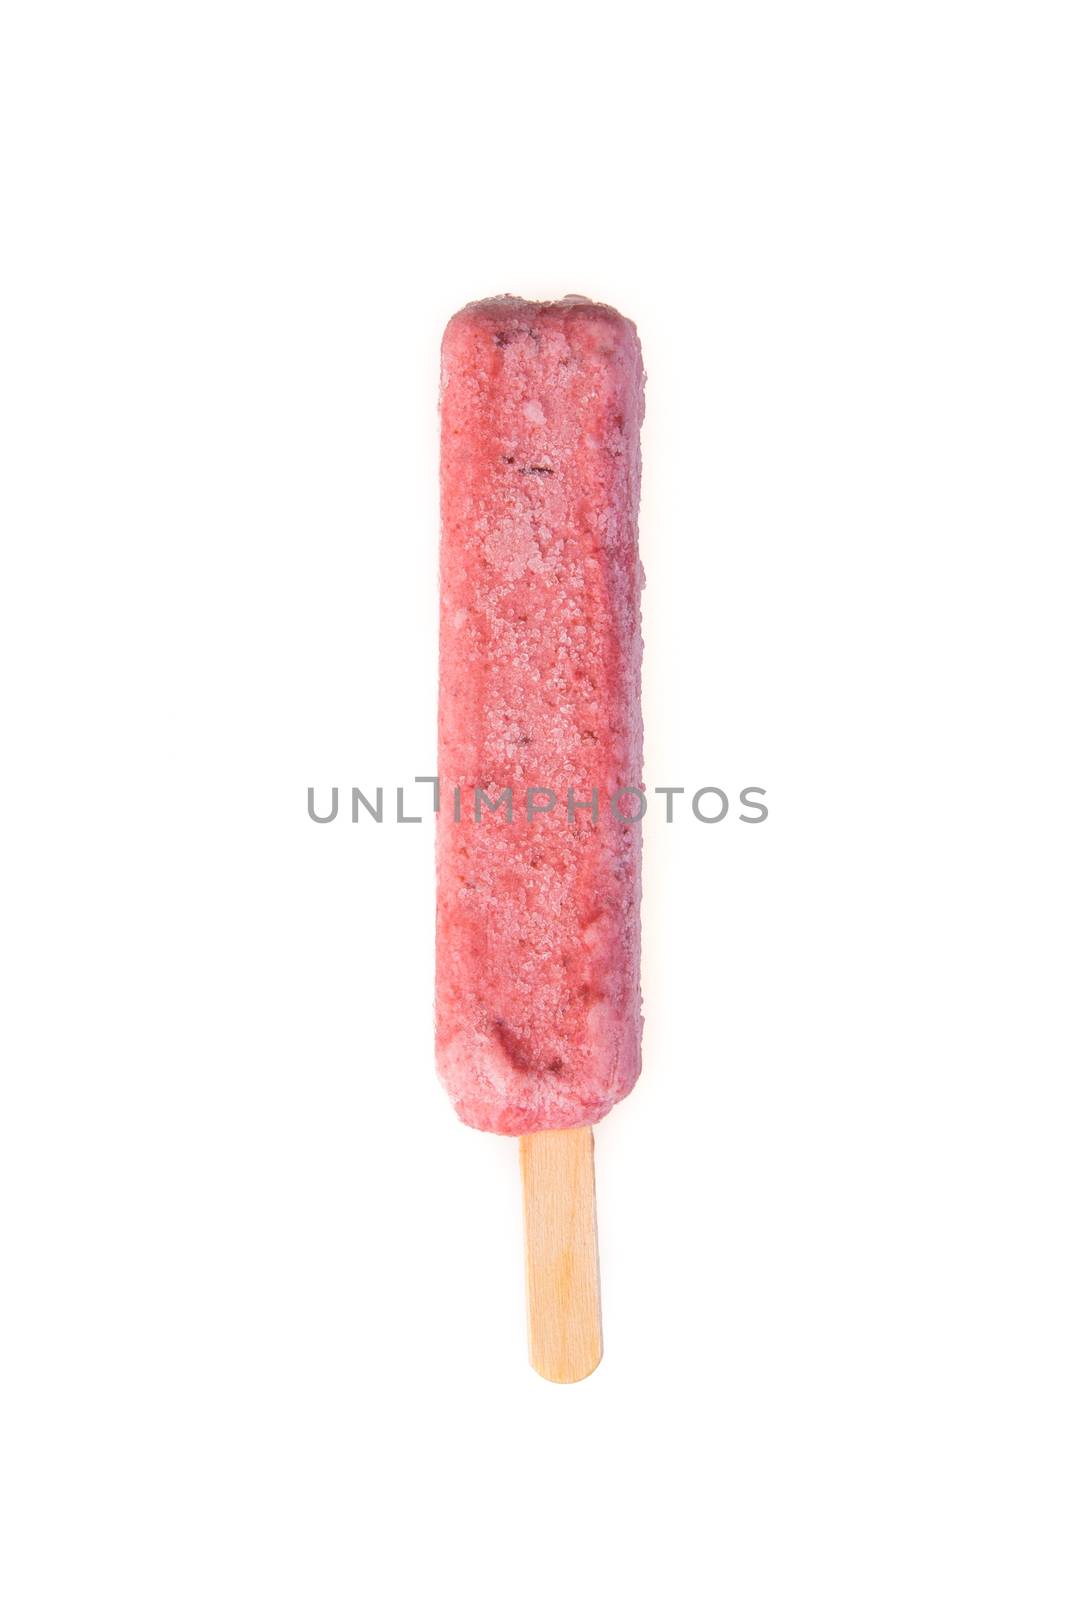 ice cream popsicle isolated on white background by tehcheesiong